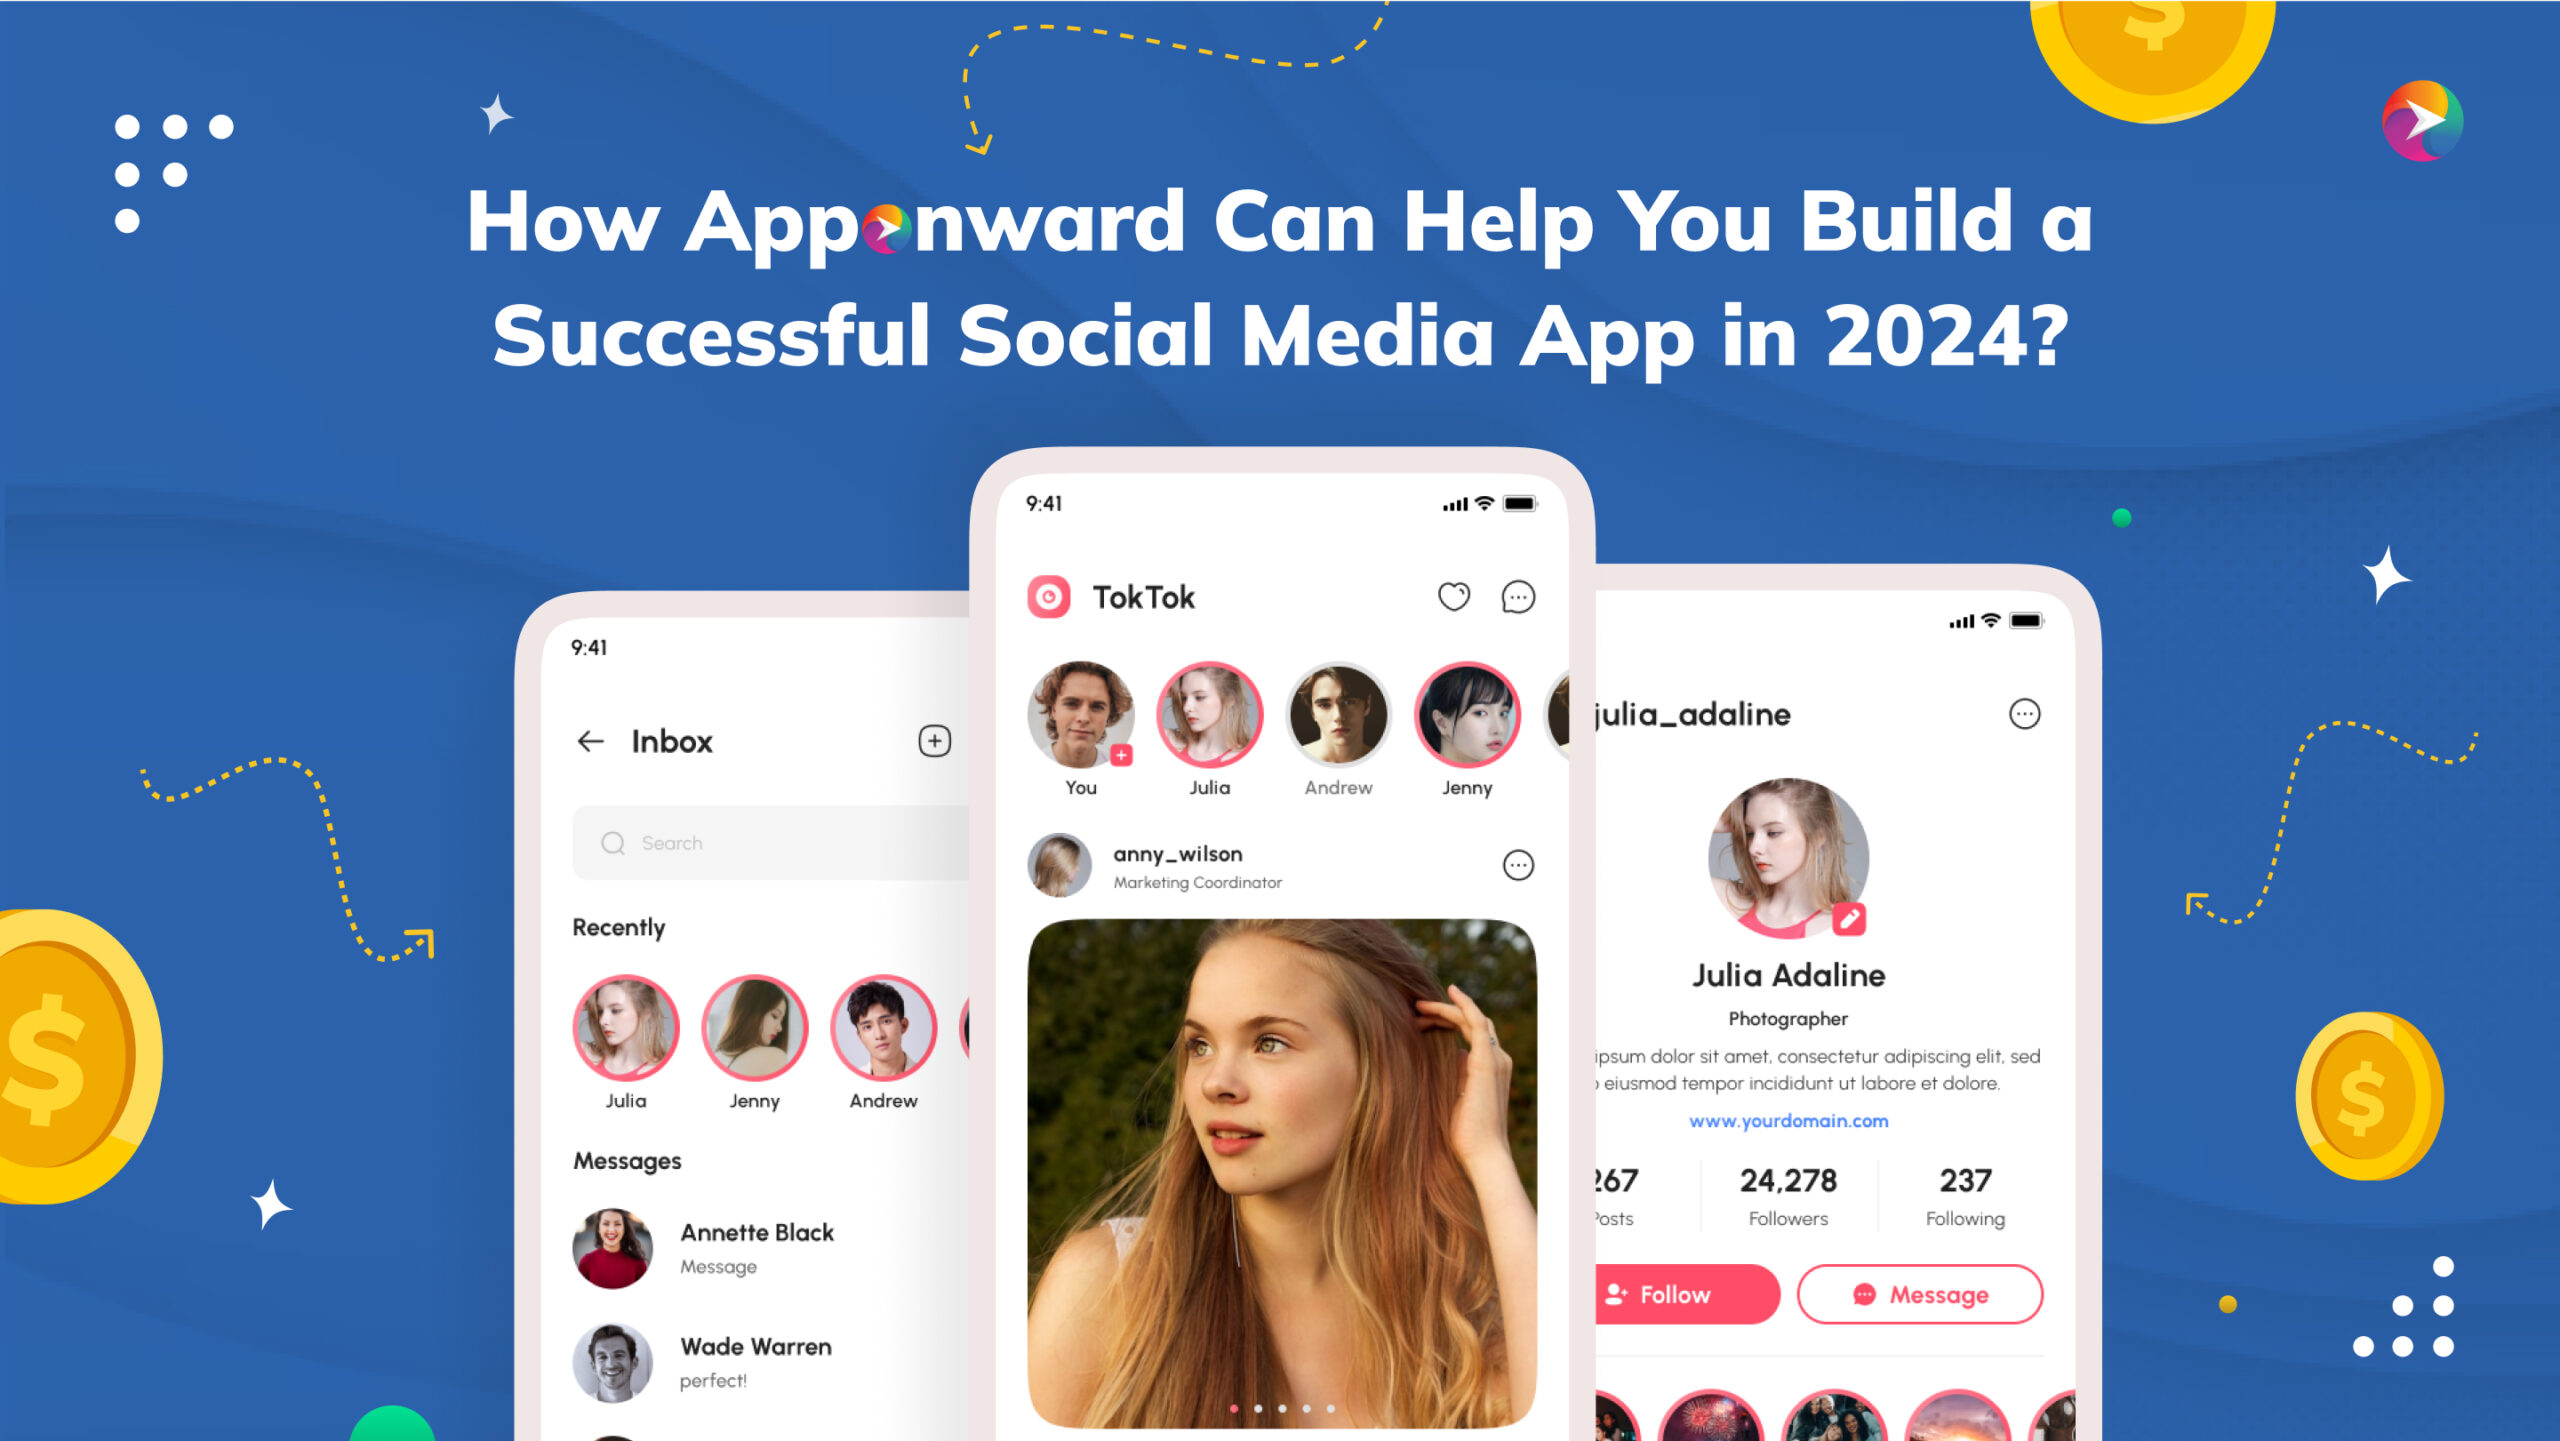 This image explains with the heading "How Apponward Can Help You Build a Successful Social Media App in 2024?" on the Top and three mobile screens at the bottom. 